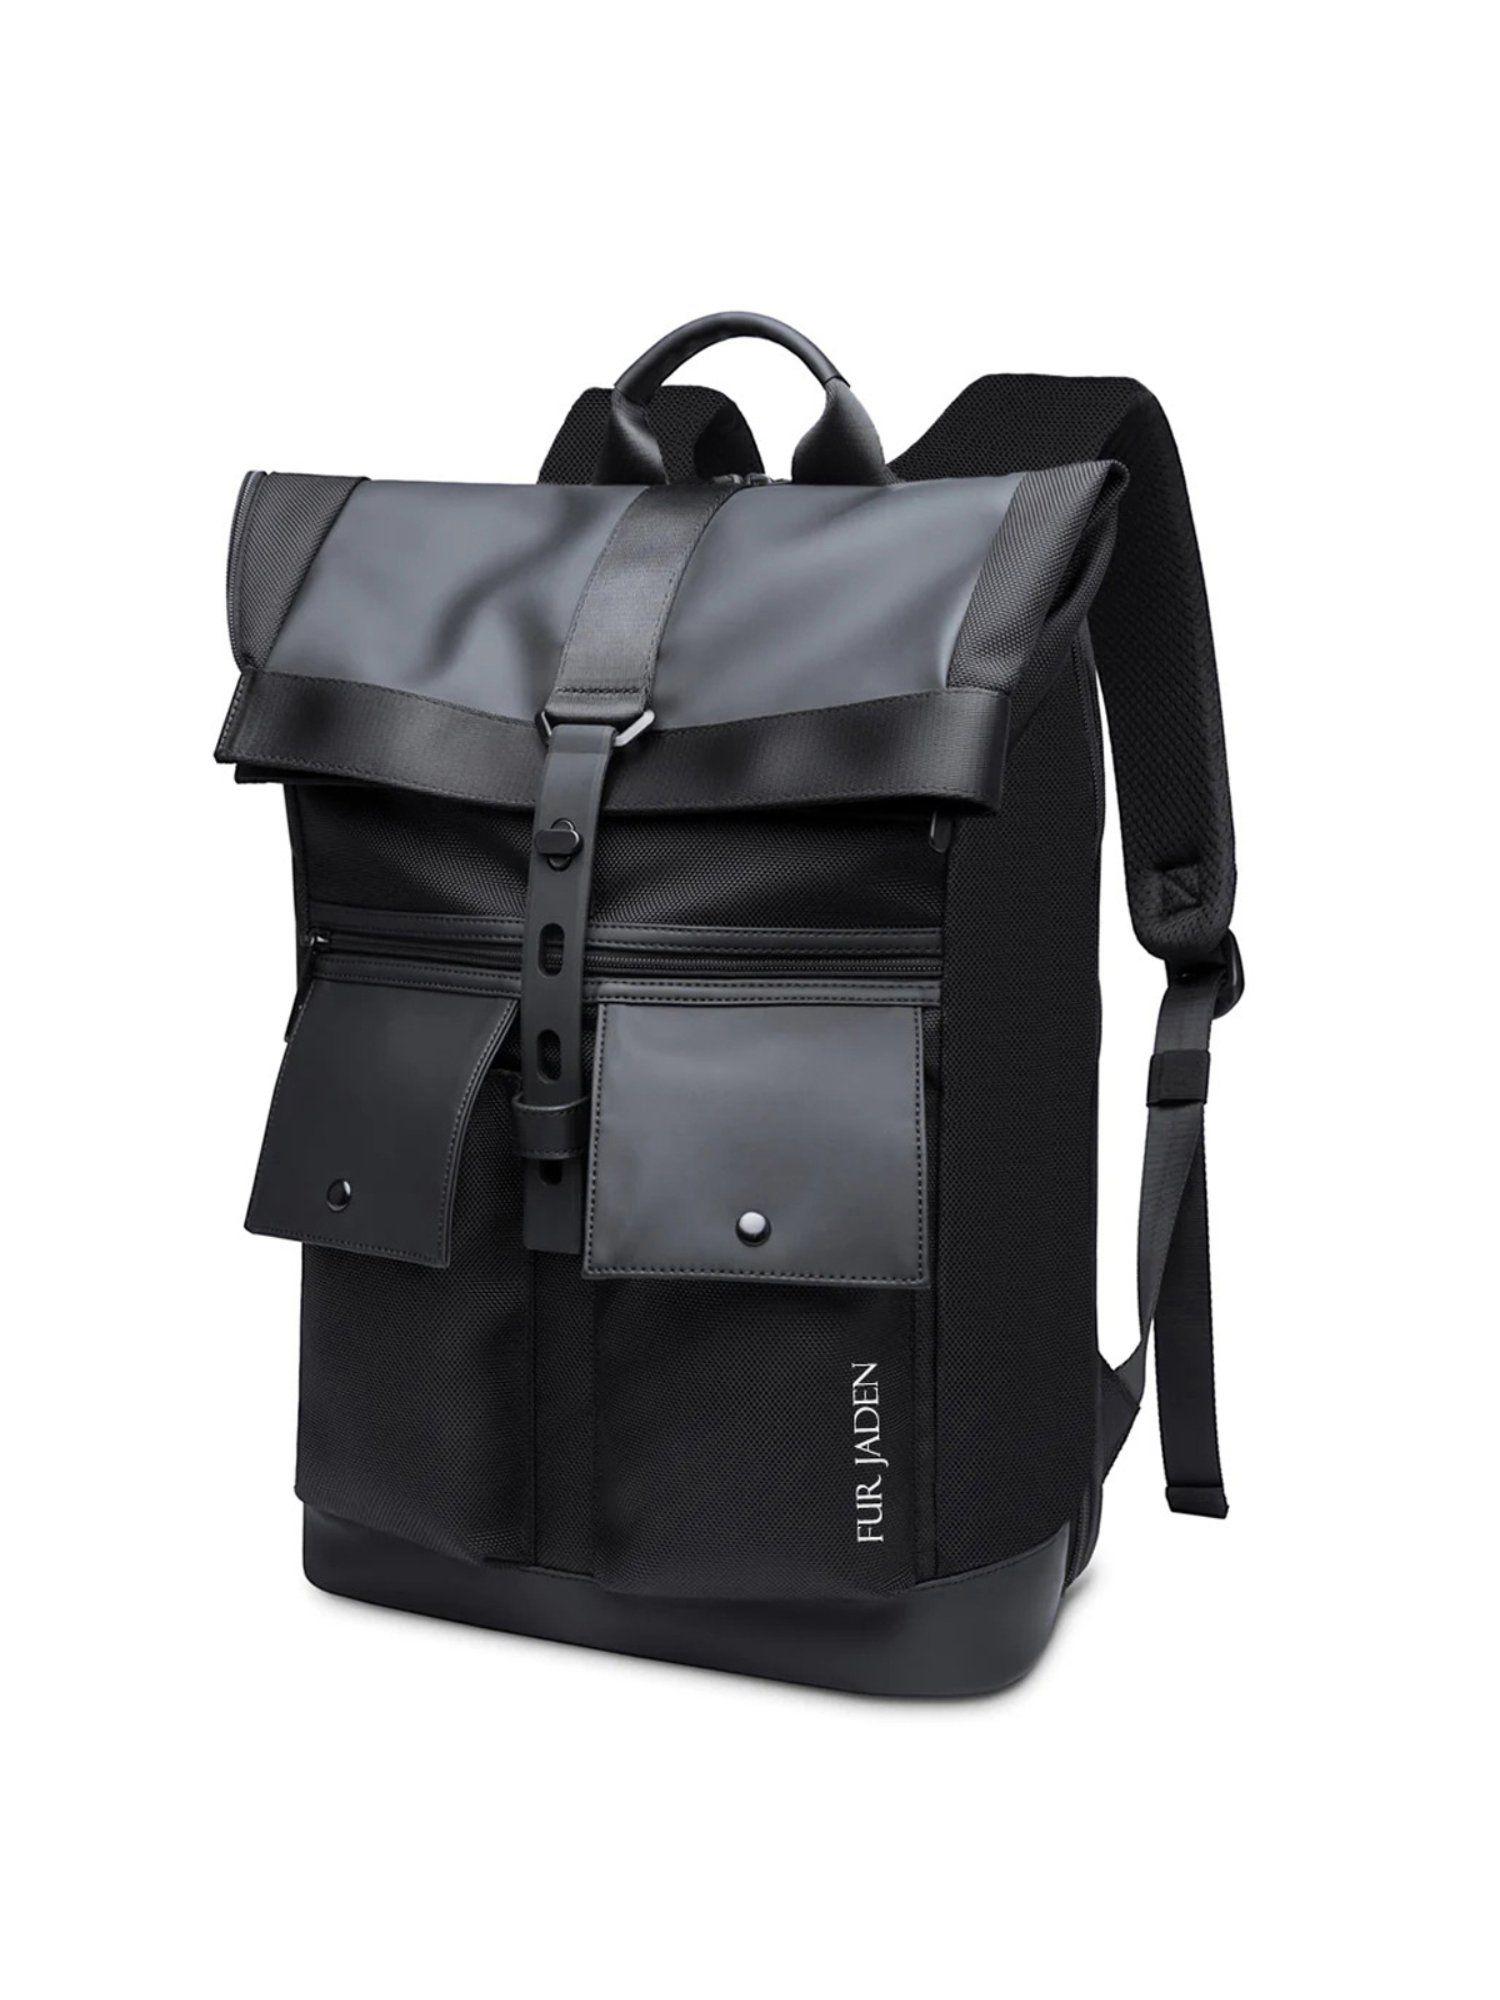 pro-series-innovative-sack-styled-smart-anti-theft-travel-laptop-backpack